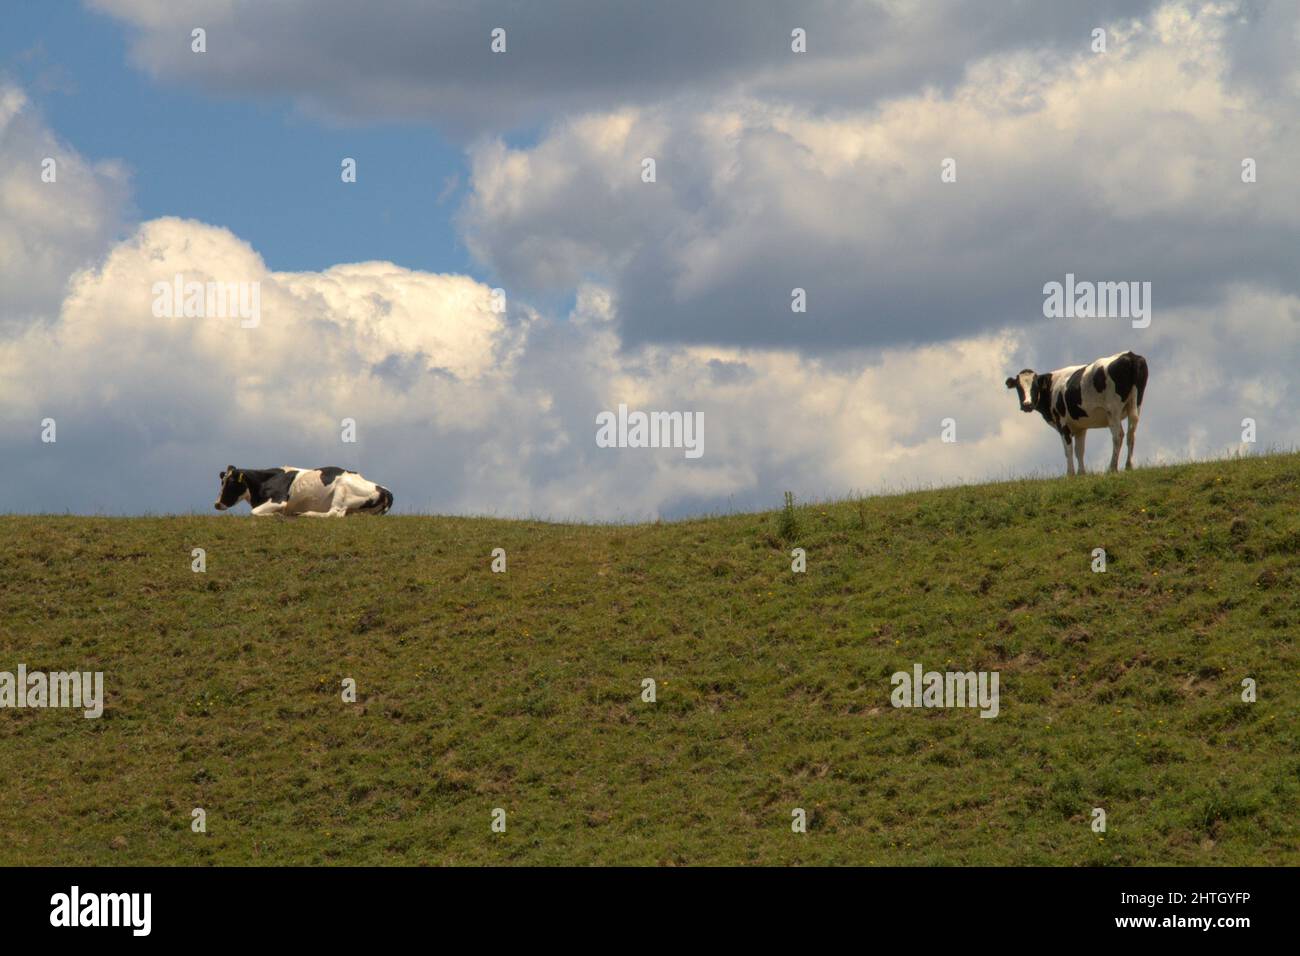 The black and white Holstein cows at the crest of a hill on North Island in New Zealand. One rests and the other looks toward the camera. Stock Photo